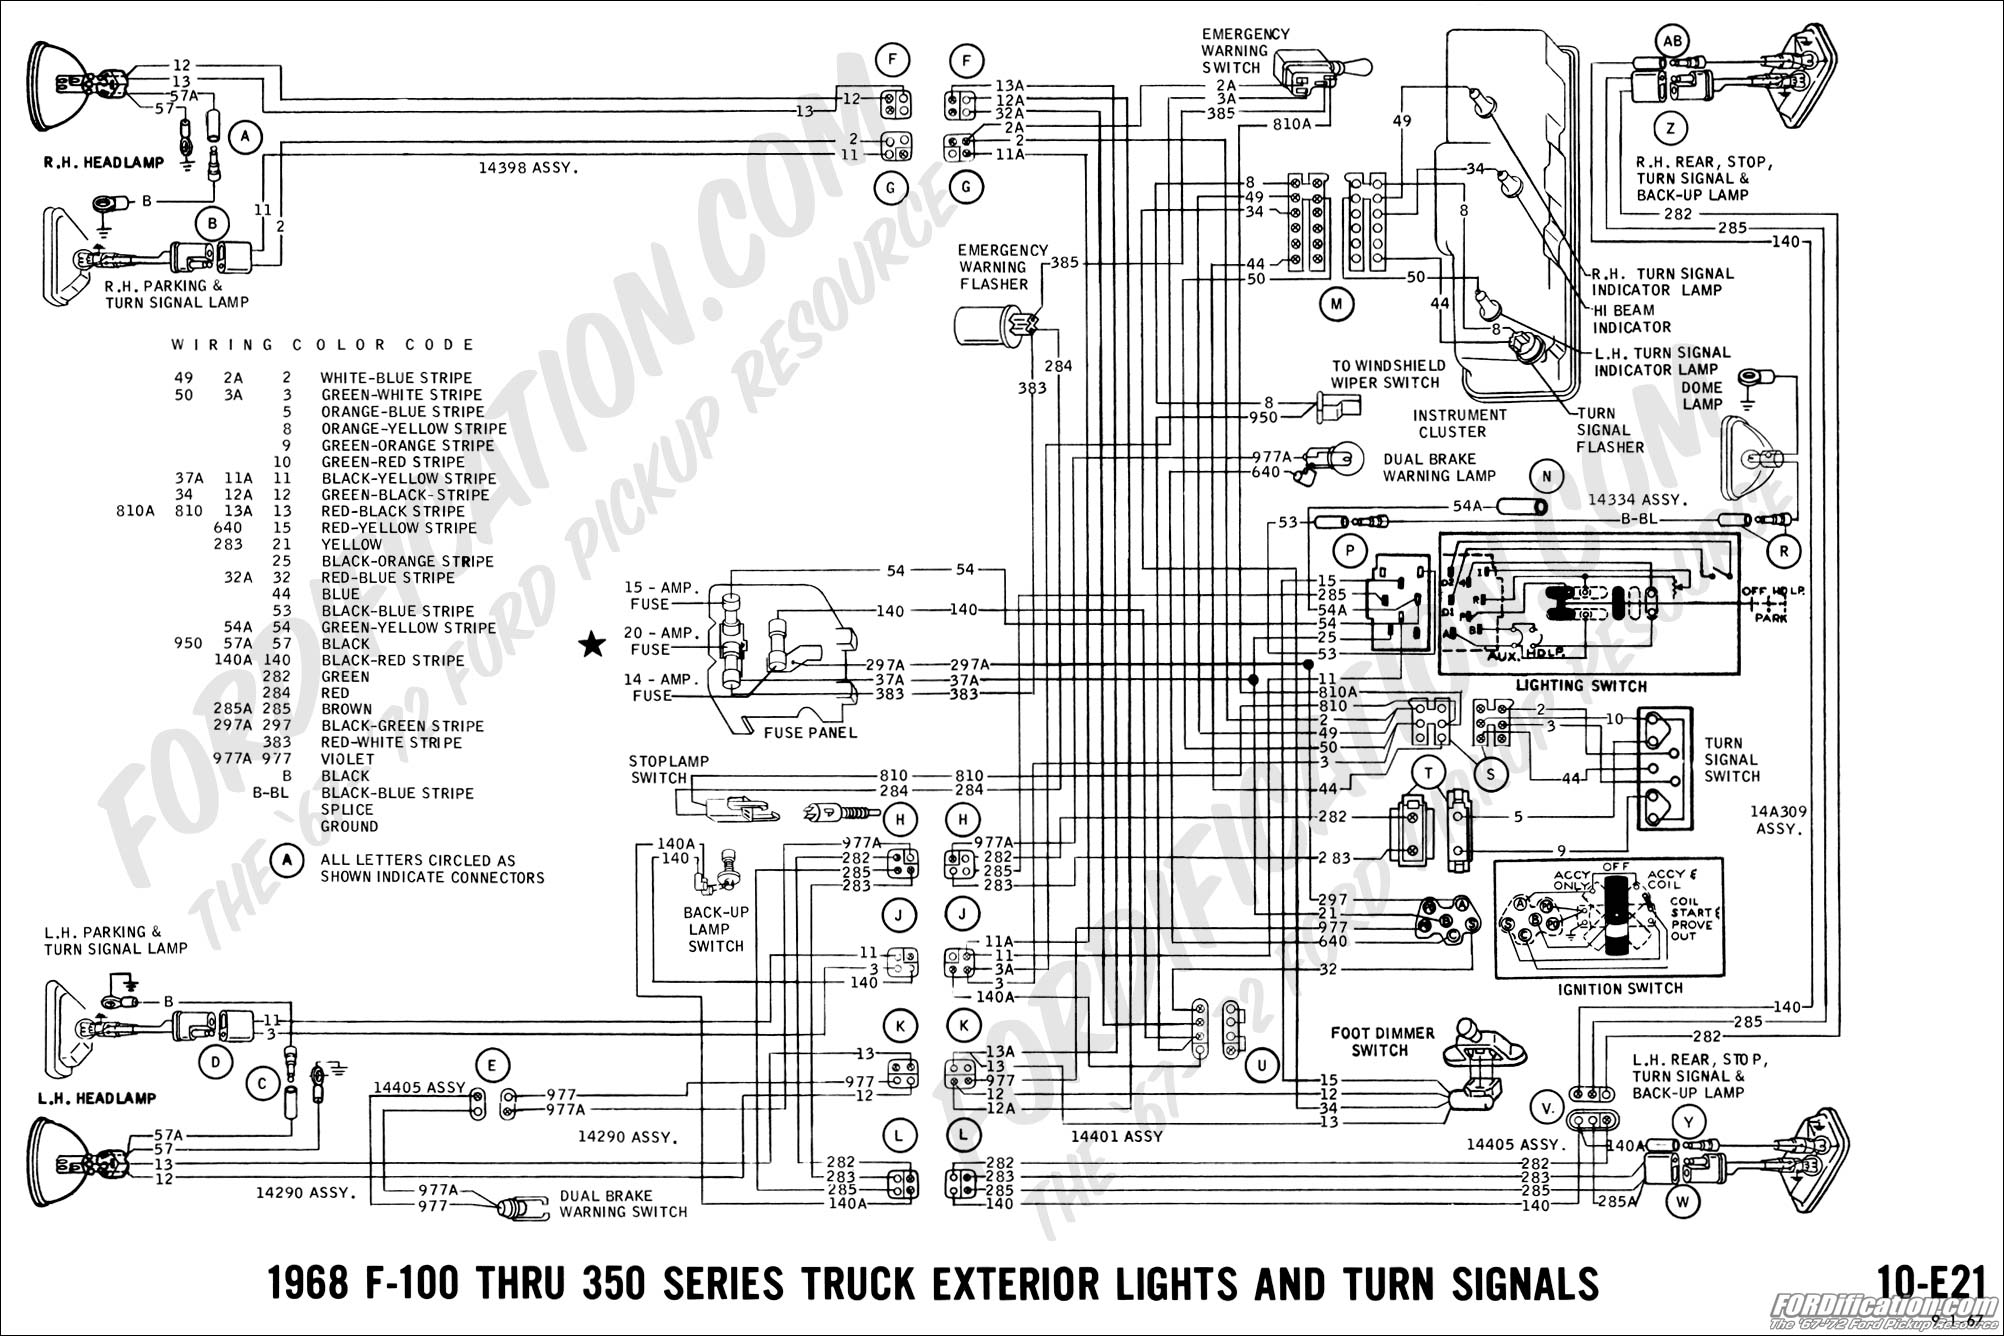 Ford Truck Technical Drawings and Schematics - Section H - Wiring Diagrams 67 Chevy Truck Wiring Diagram FORDification.com